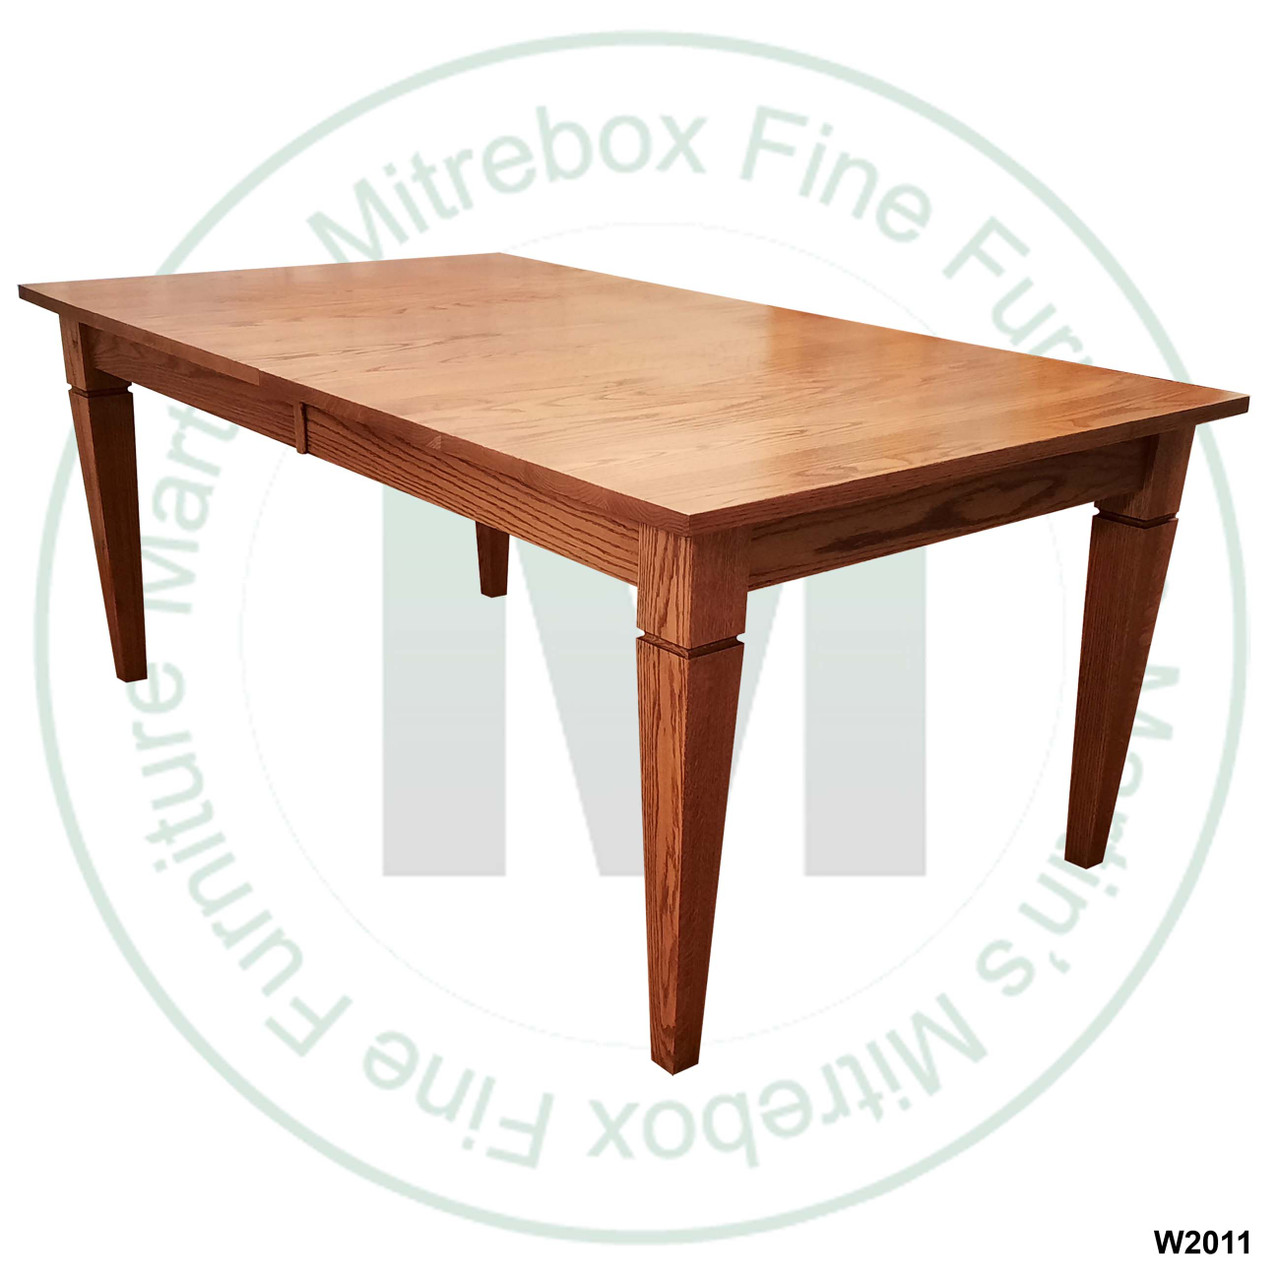 Oak Reesor Solid Top Harvest Table 42''D x 48''W x 30''H Table Has 1.25'' Thick Top